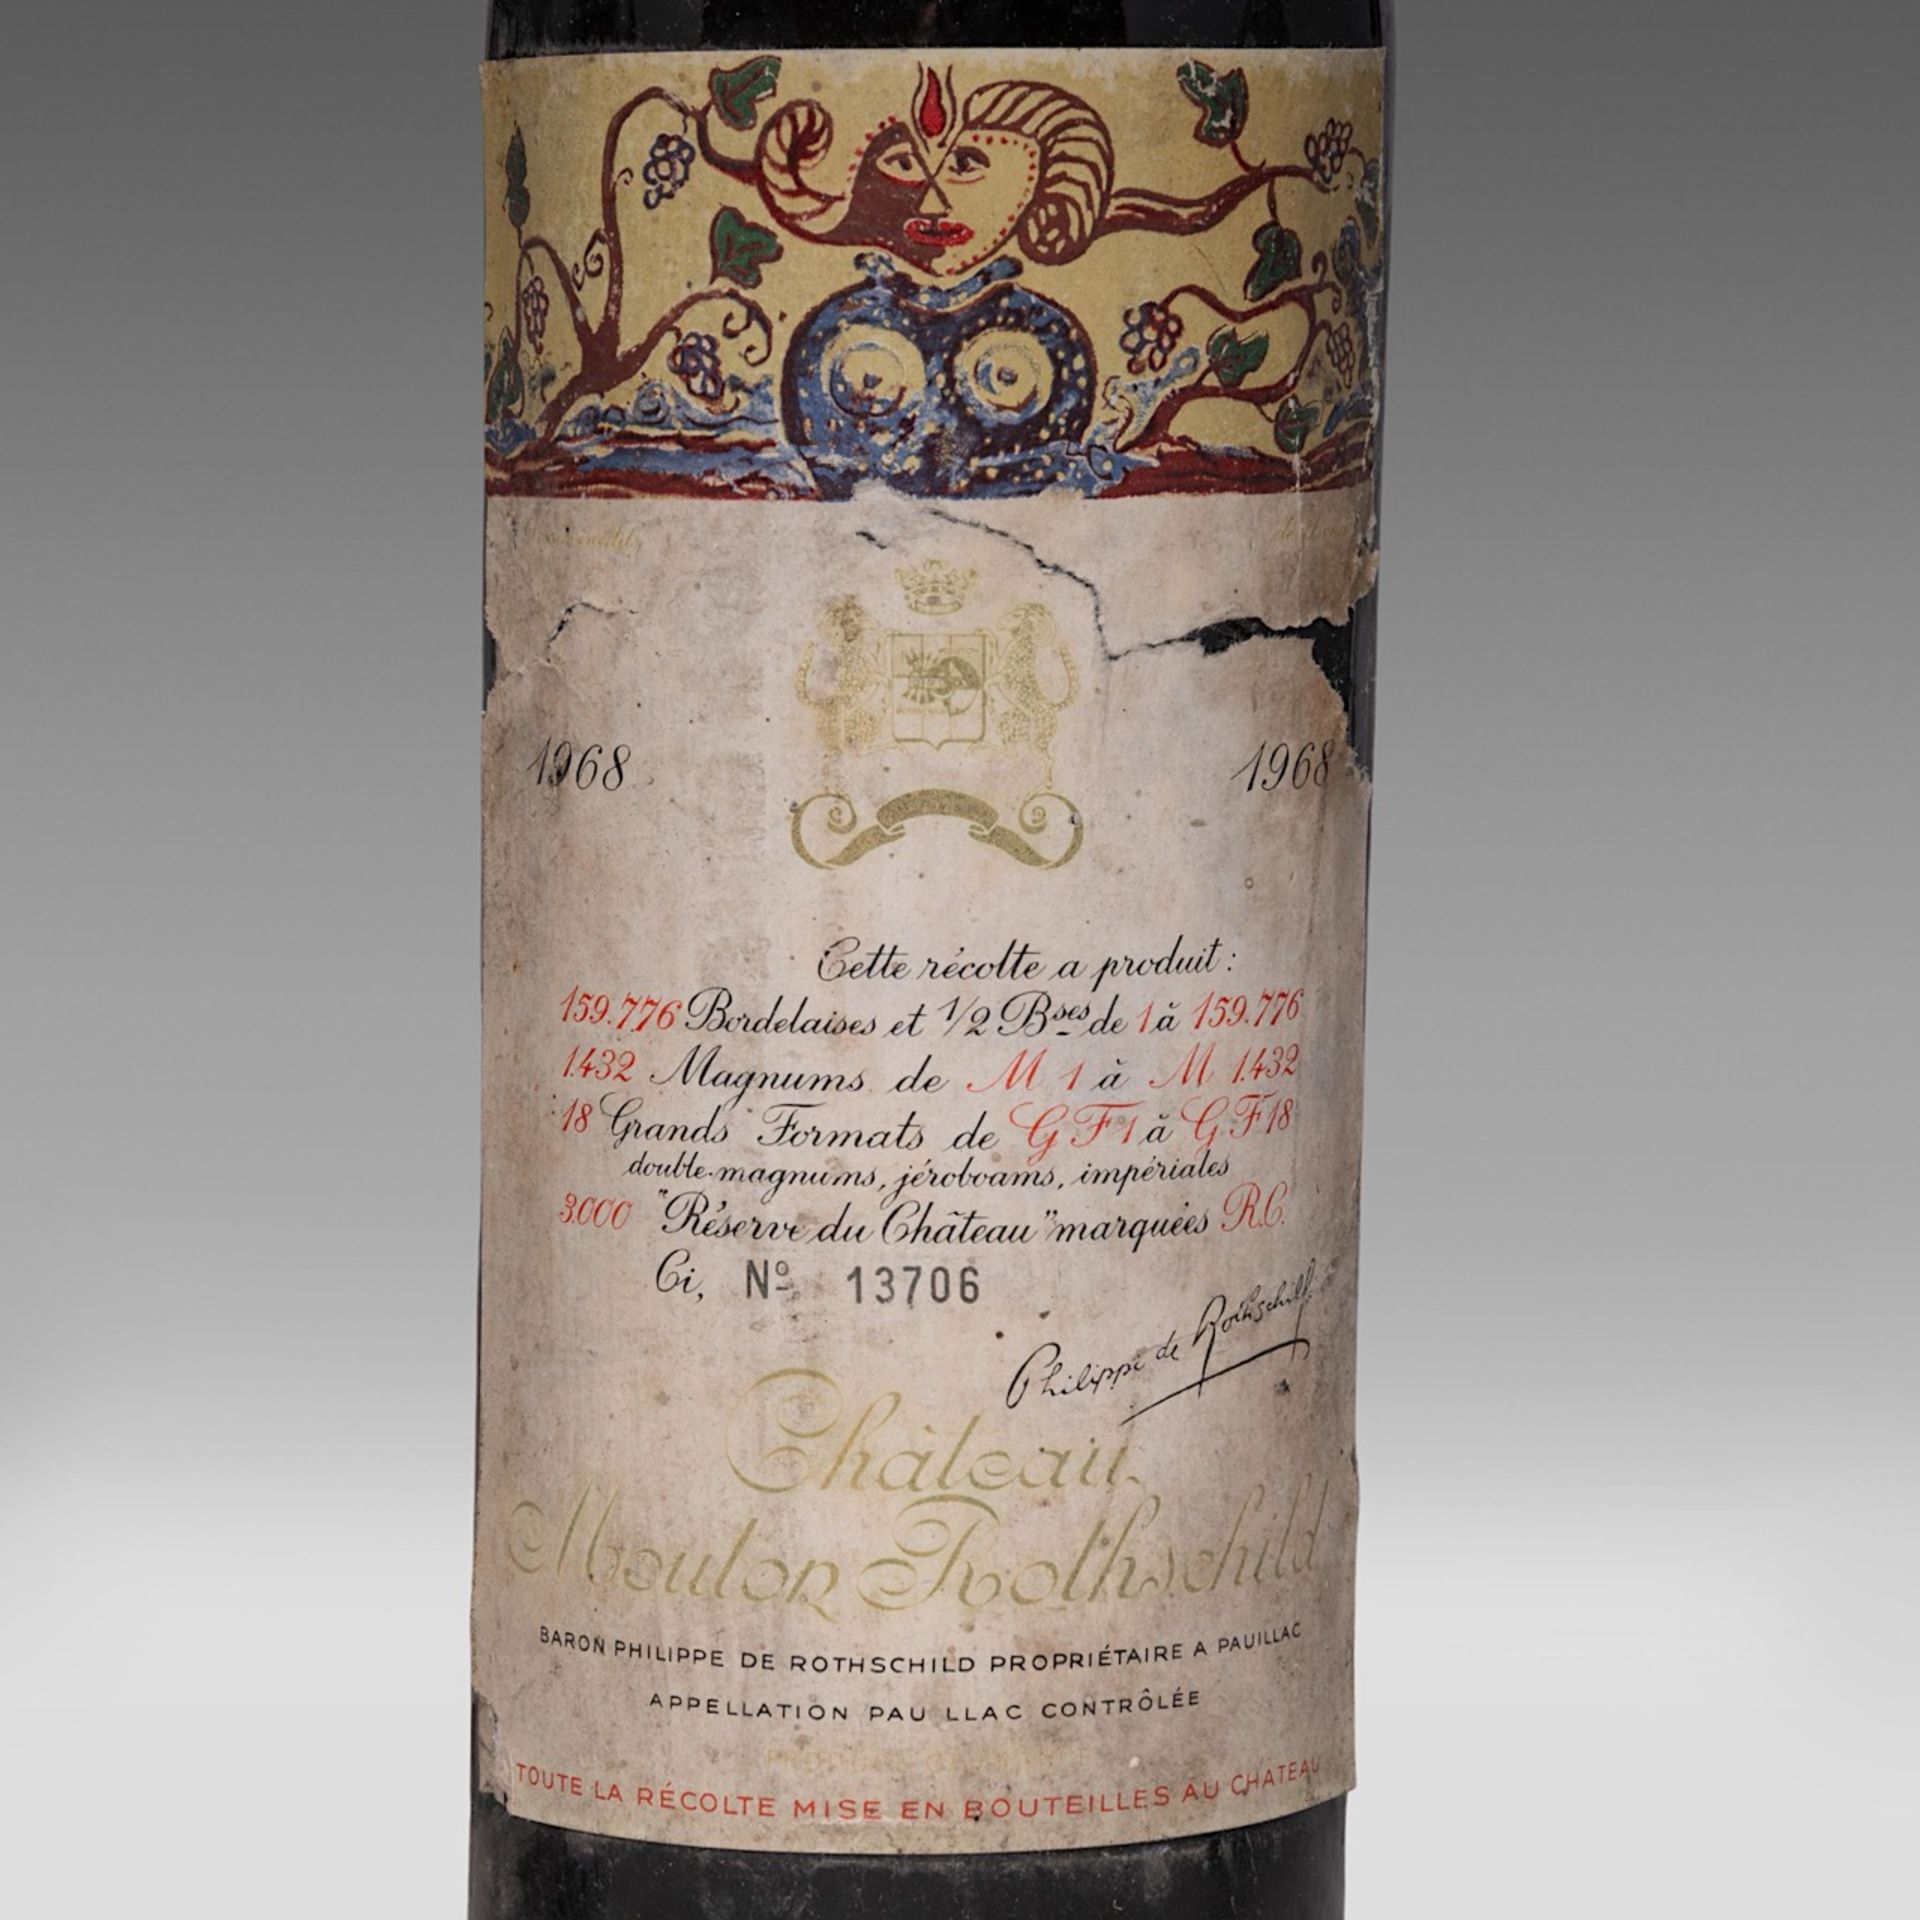 Two bottles 1968 Chateau Mouton Rothschild and a 1990 Chateau Mouton Rothschild - Bild 3 aus 5